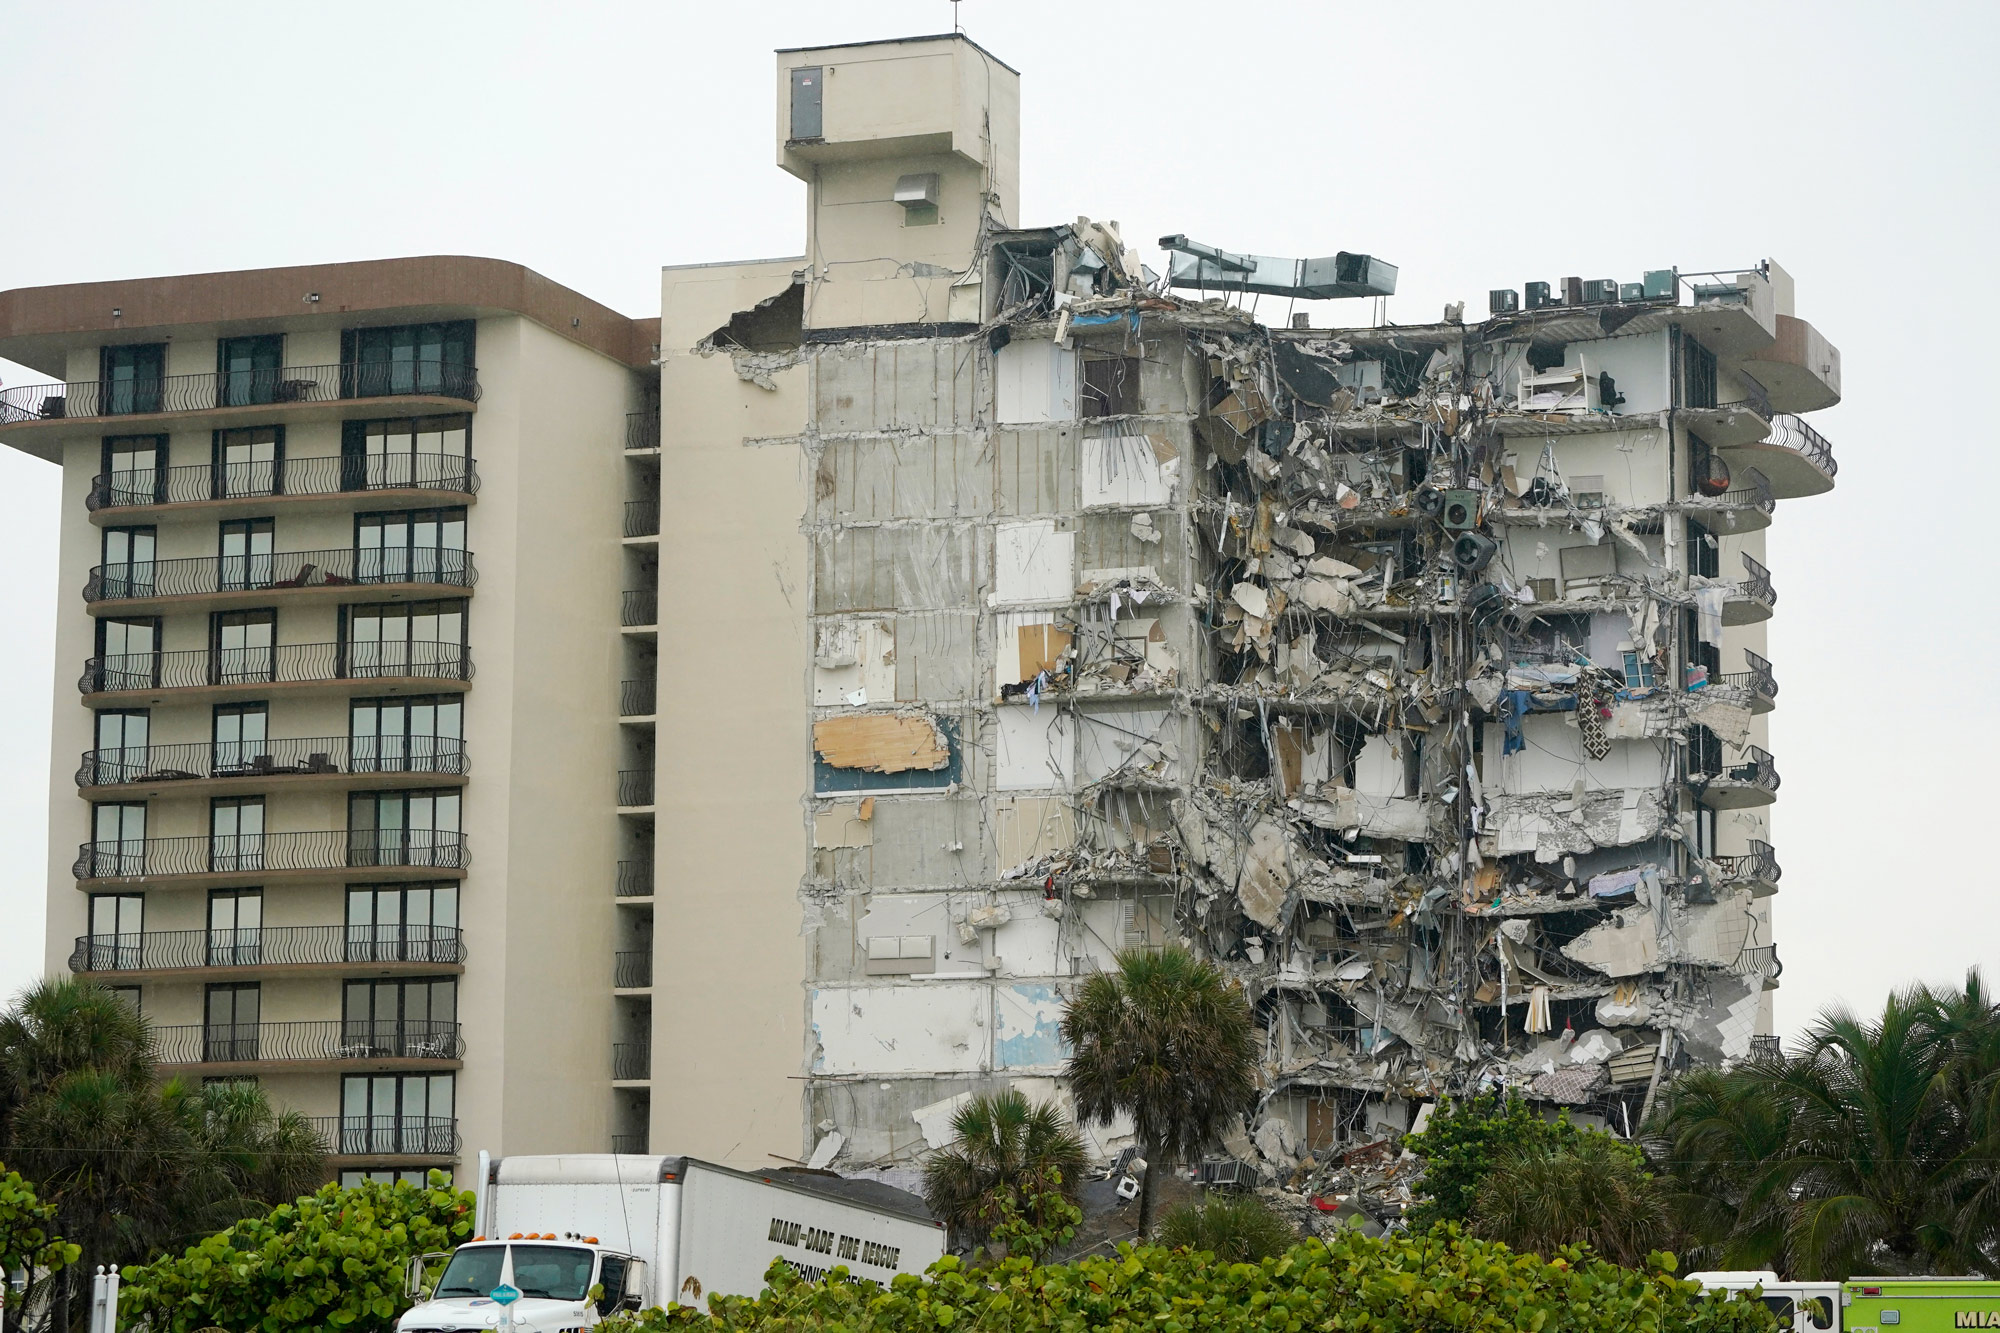 The Champlain Towers South condo building is seen after a partial collapse on June 24 in Surfside, Florida.